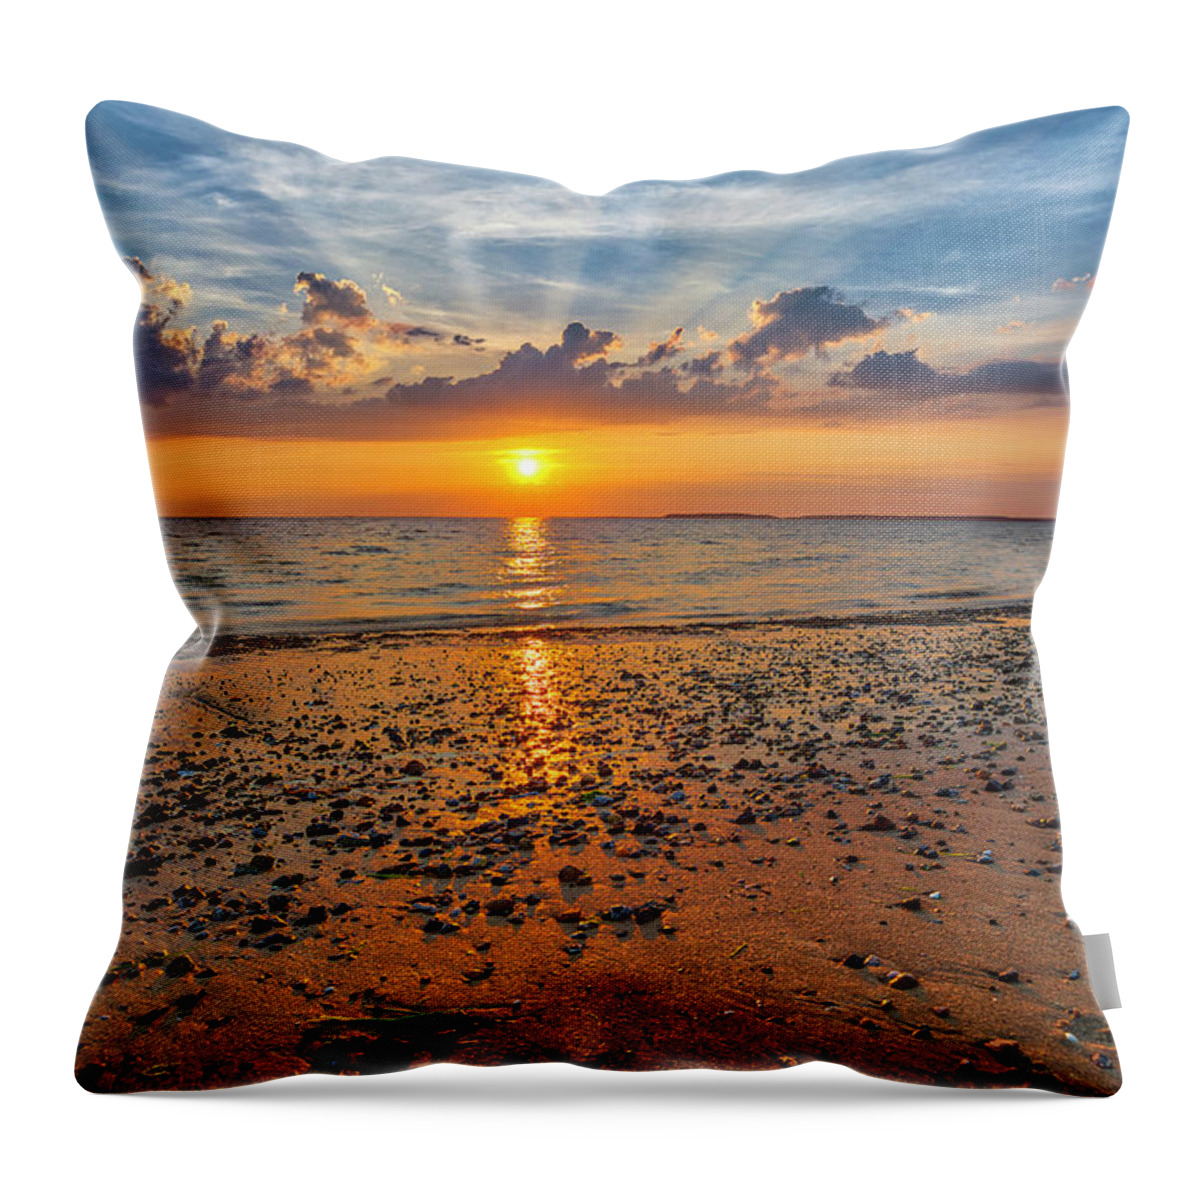 Cape Cod Bay Throw Pillow featuring the photograph Cape Cod Bay Sunset Bliss by Juergen Roth